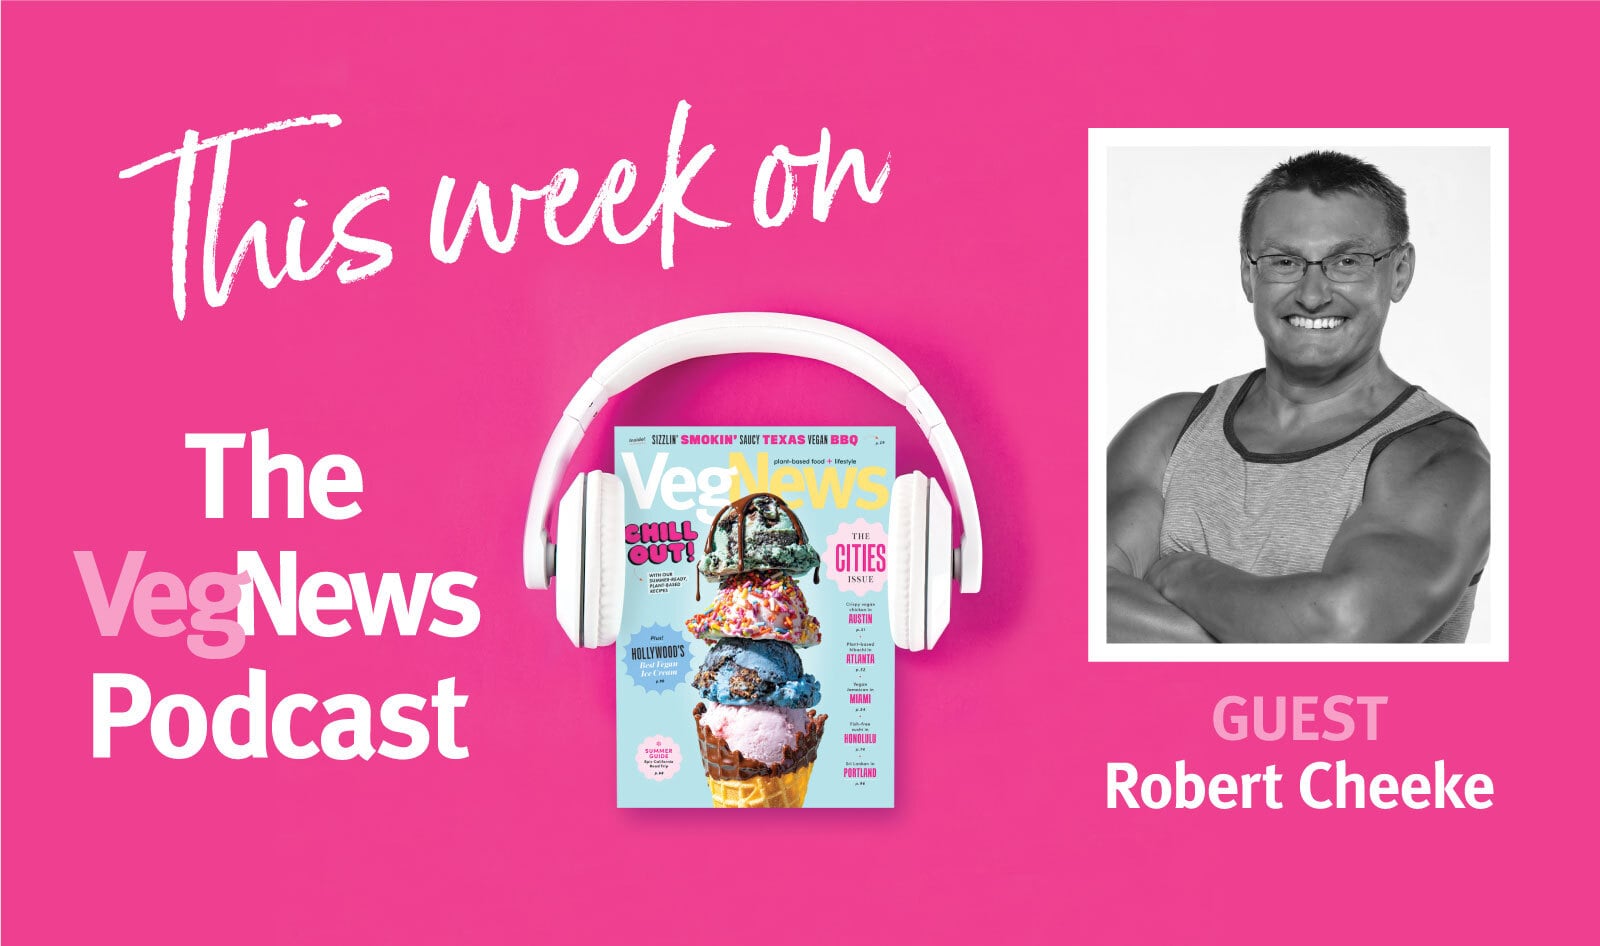 The VegNews Podcast Show Notes: Episode 3